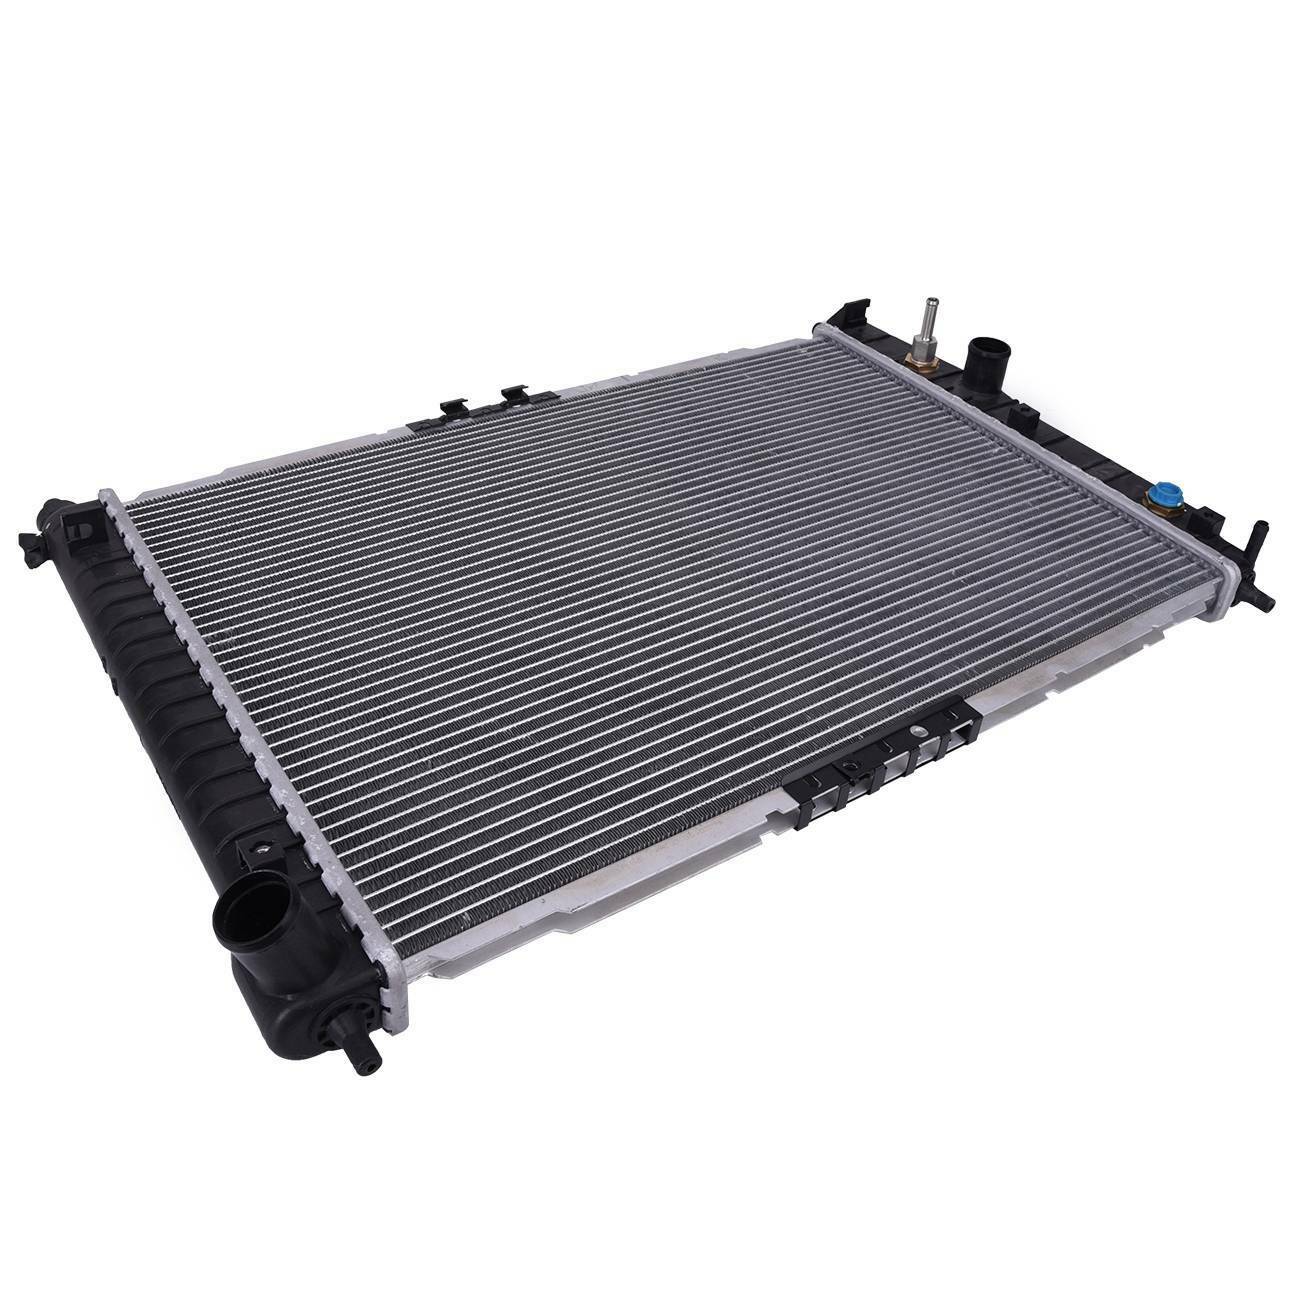 Cooling Radiator for Holden Barina TK 2005-2008 1.6 L Auto / Man 96536526 German Made